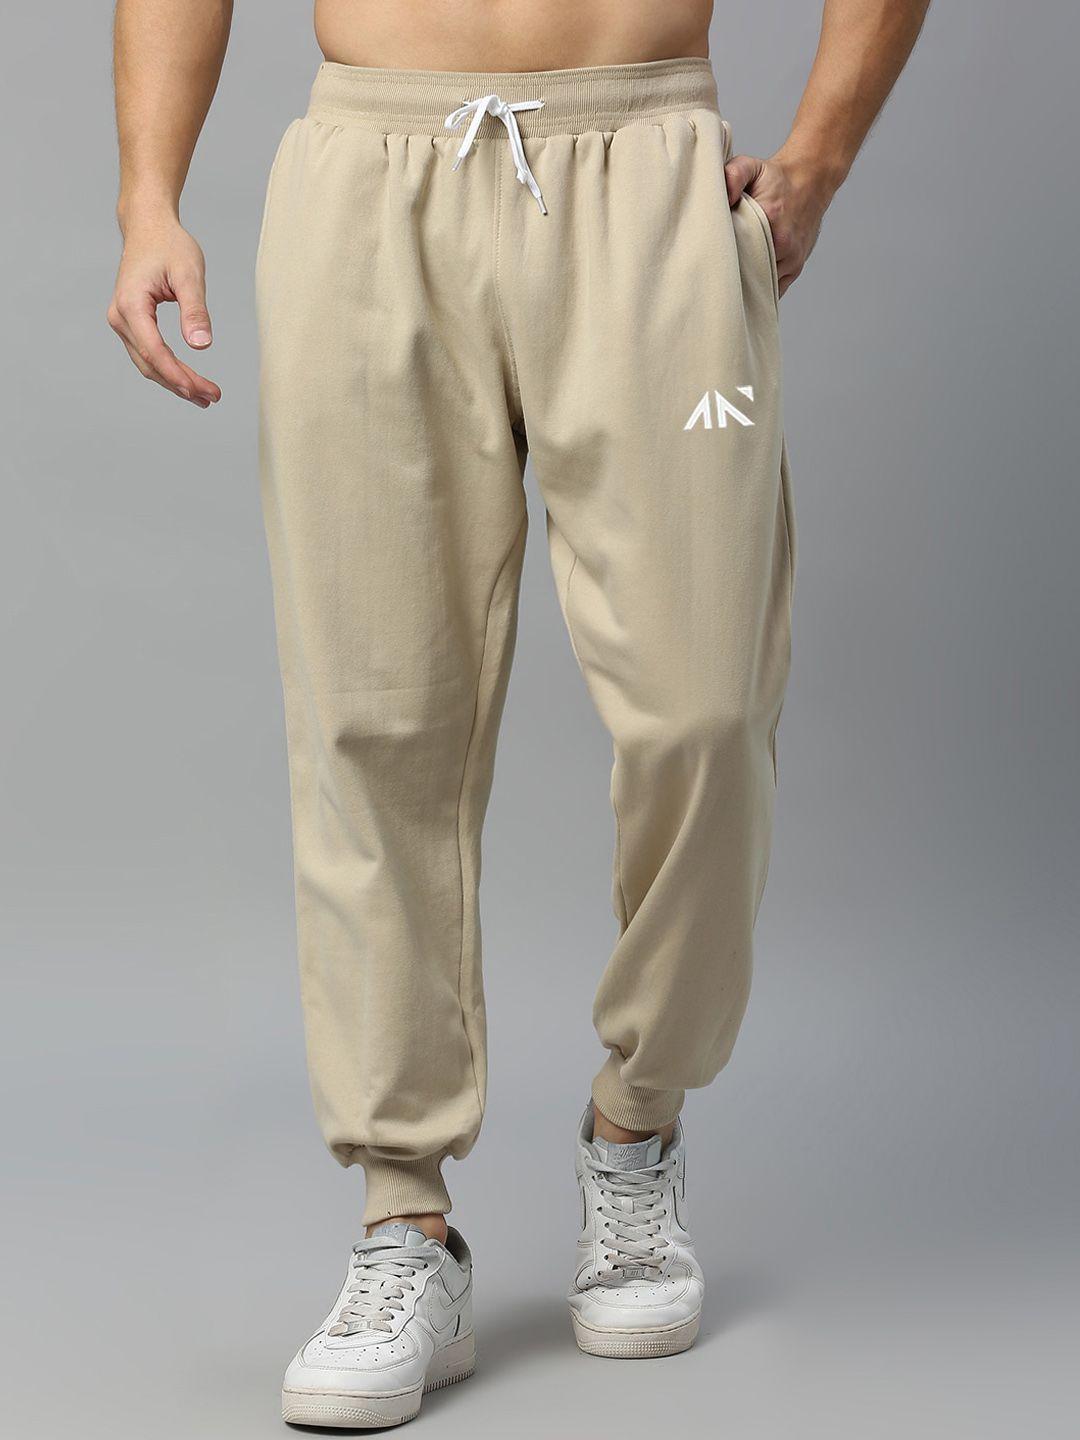 aesthetic nation men mid rise relaxed fit joggers